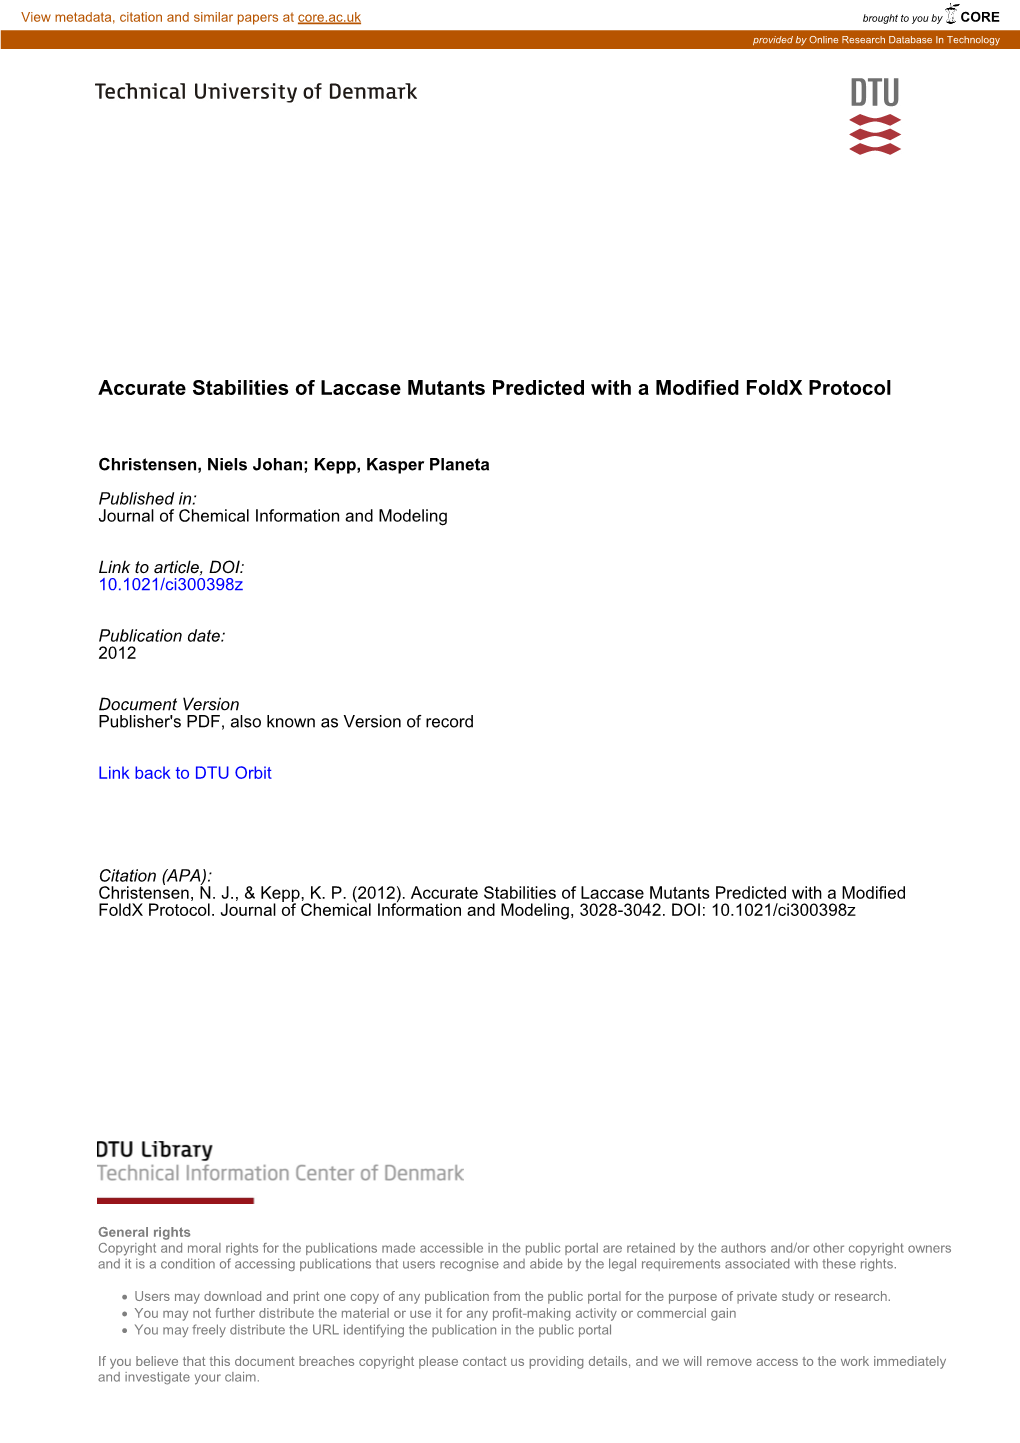 Accurate Stabilities of Laccase Mutants Predicted with a Modified Foldx Protocol